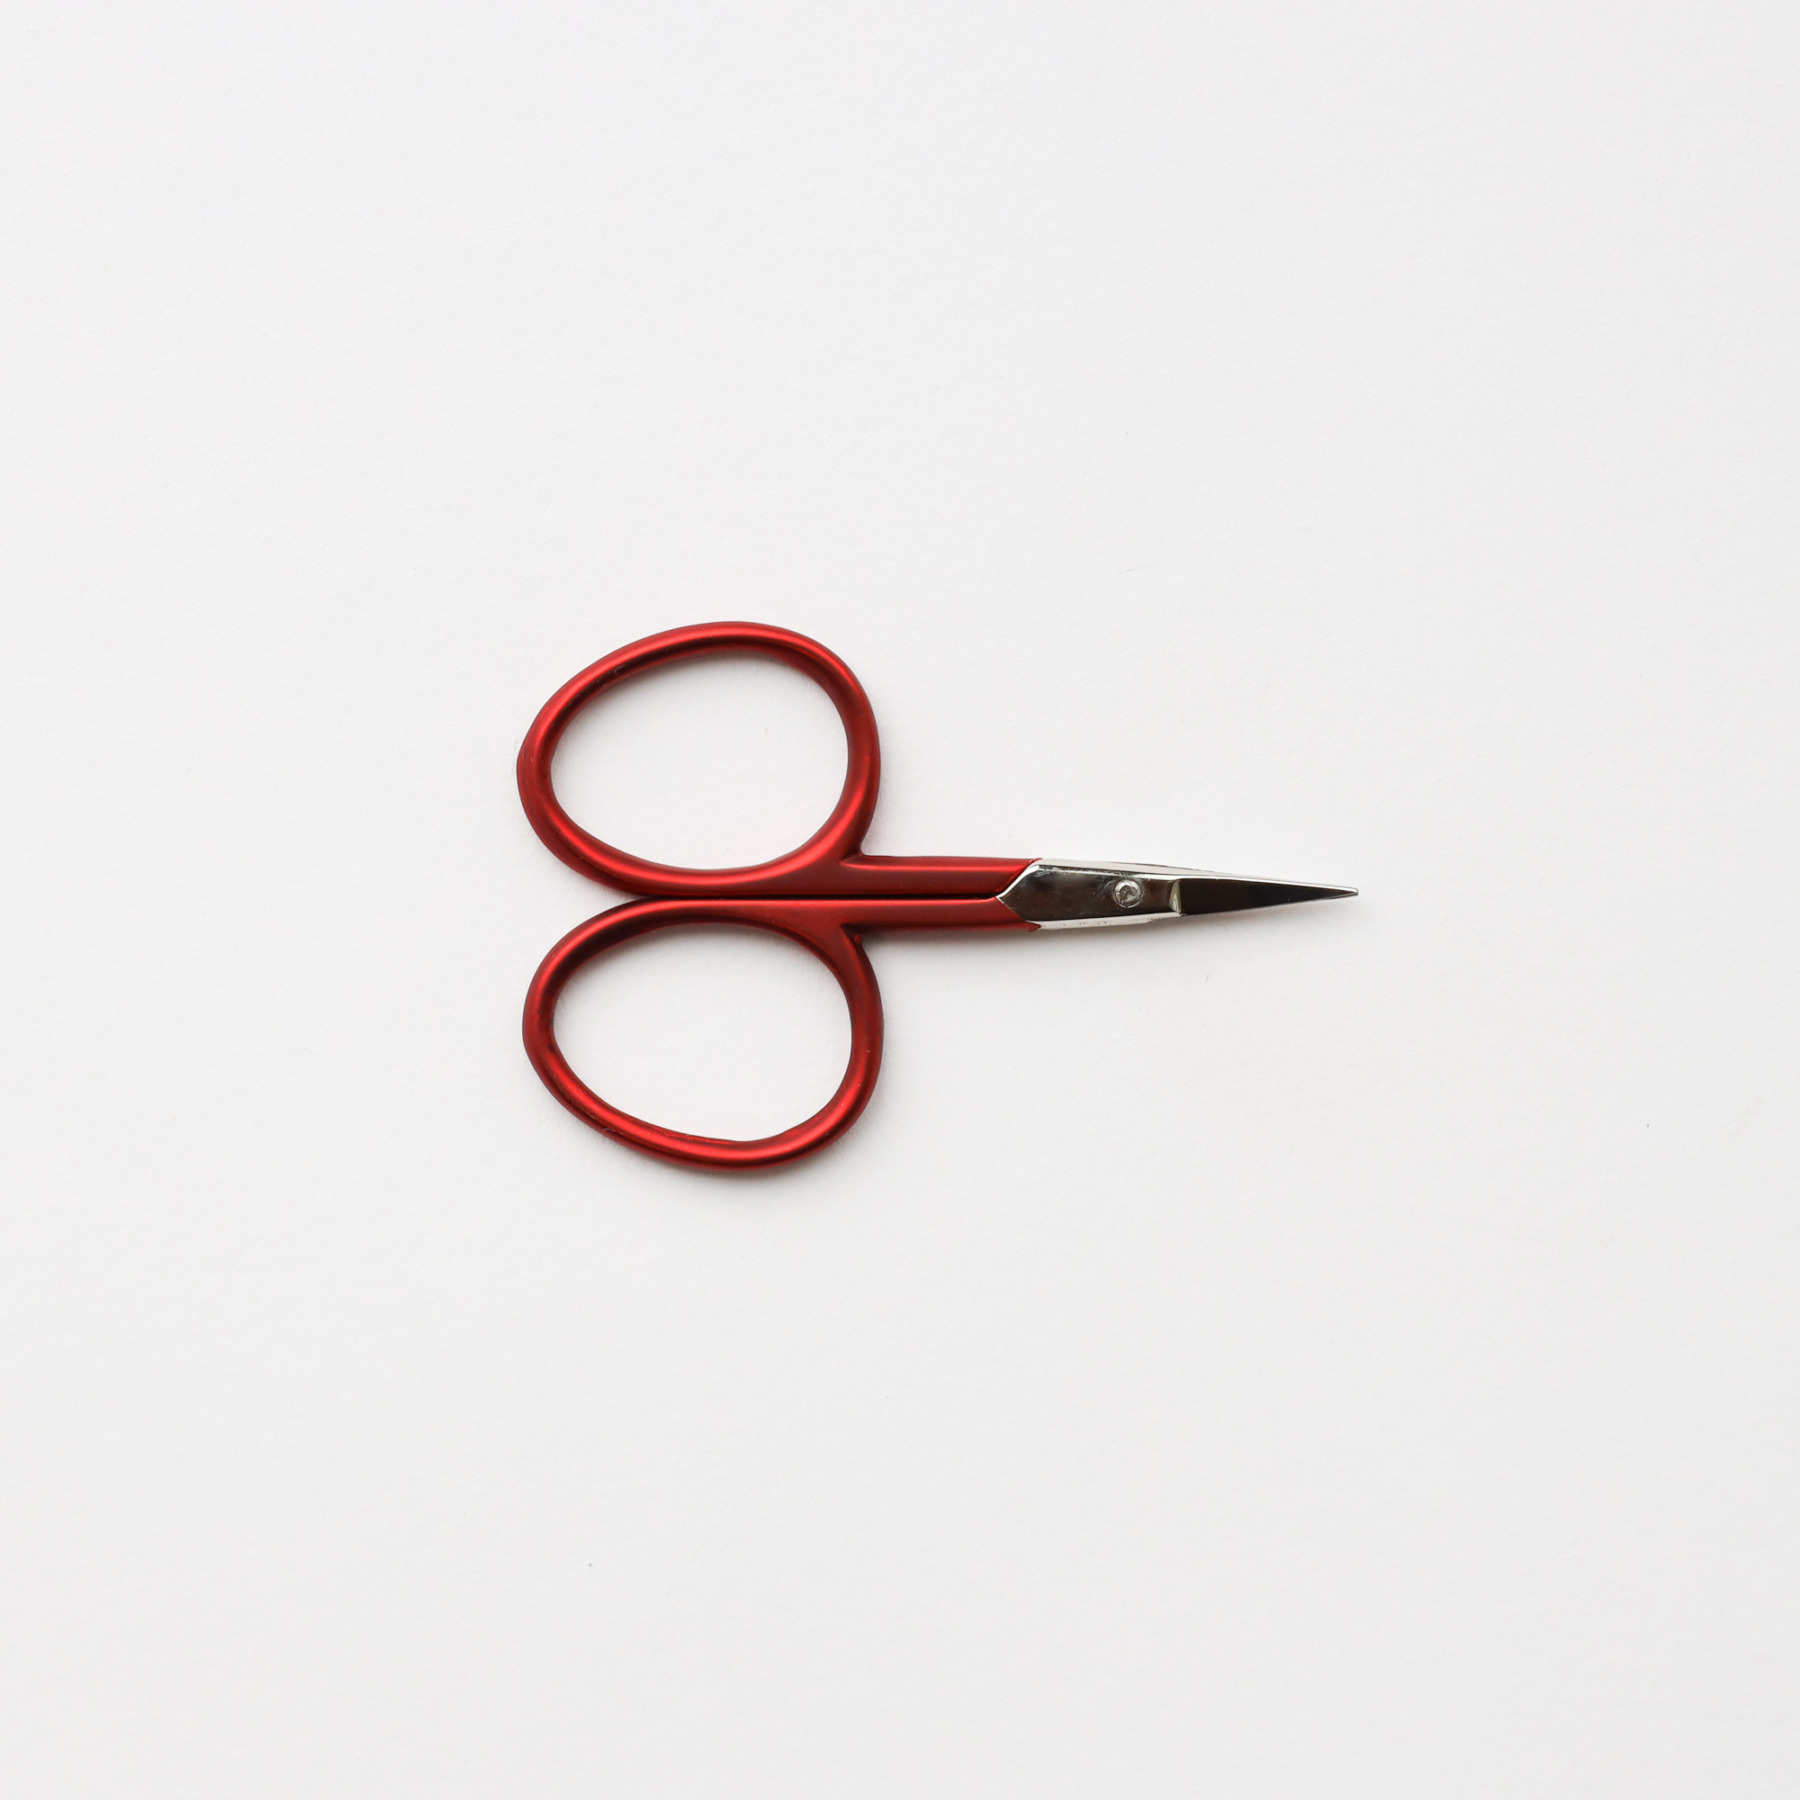 Embroidery Scissors - Soft Touch (6.4cm)